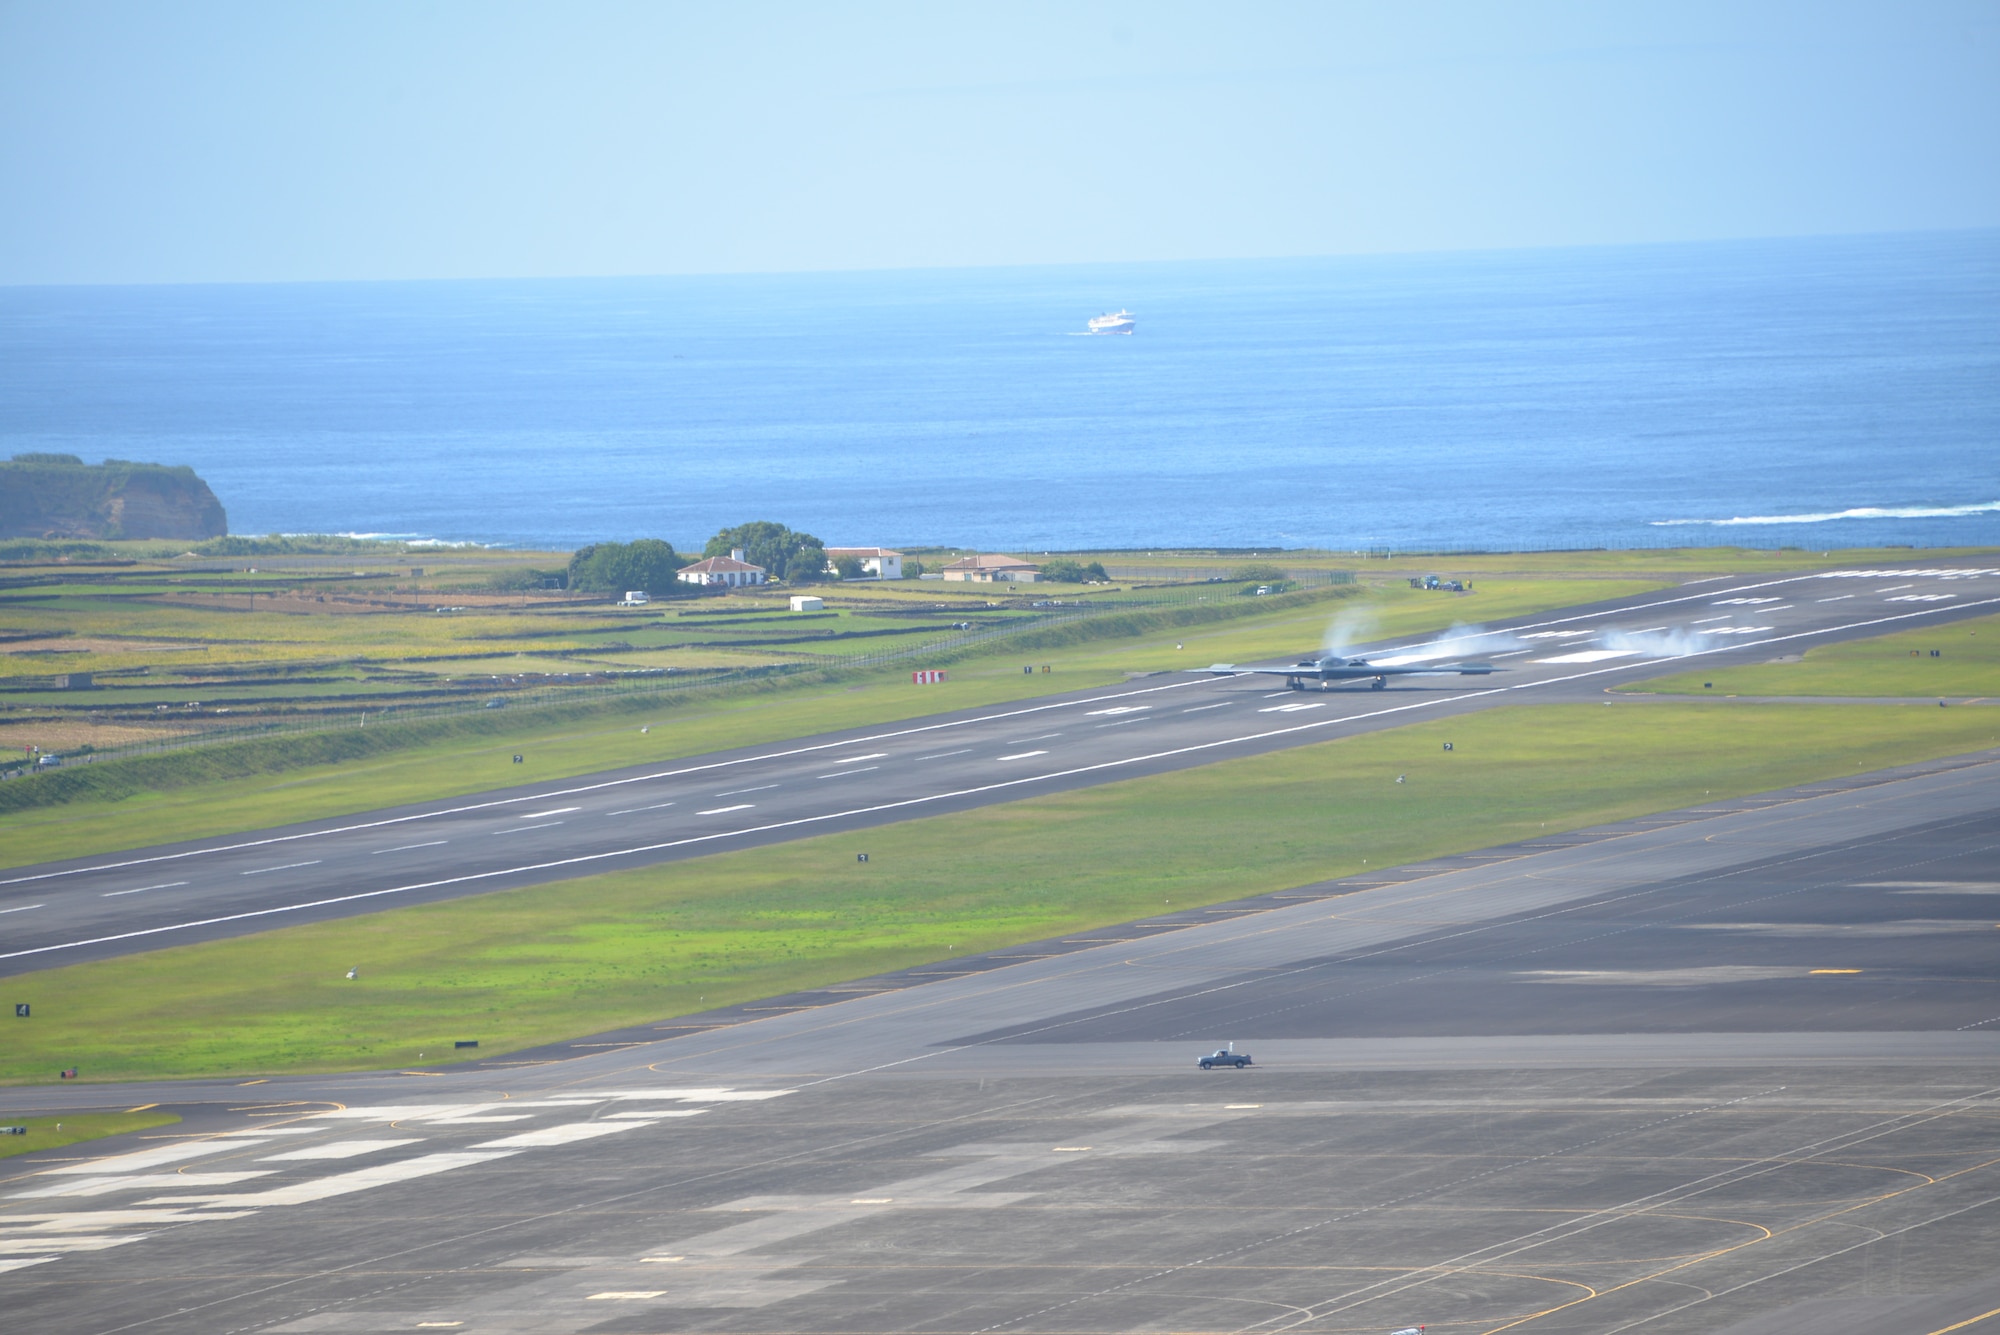 A B-2 Spirit lands at Portuguese Air Base #4, Lajes Field, Azores, Portugal. Our long standing NATO ally, provided hot-pit refueling to the B-2 aircraft and showcased the interoperability and readiness capability between the two allied nations.